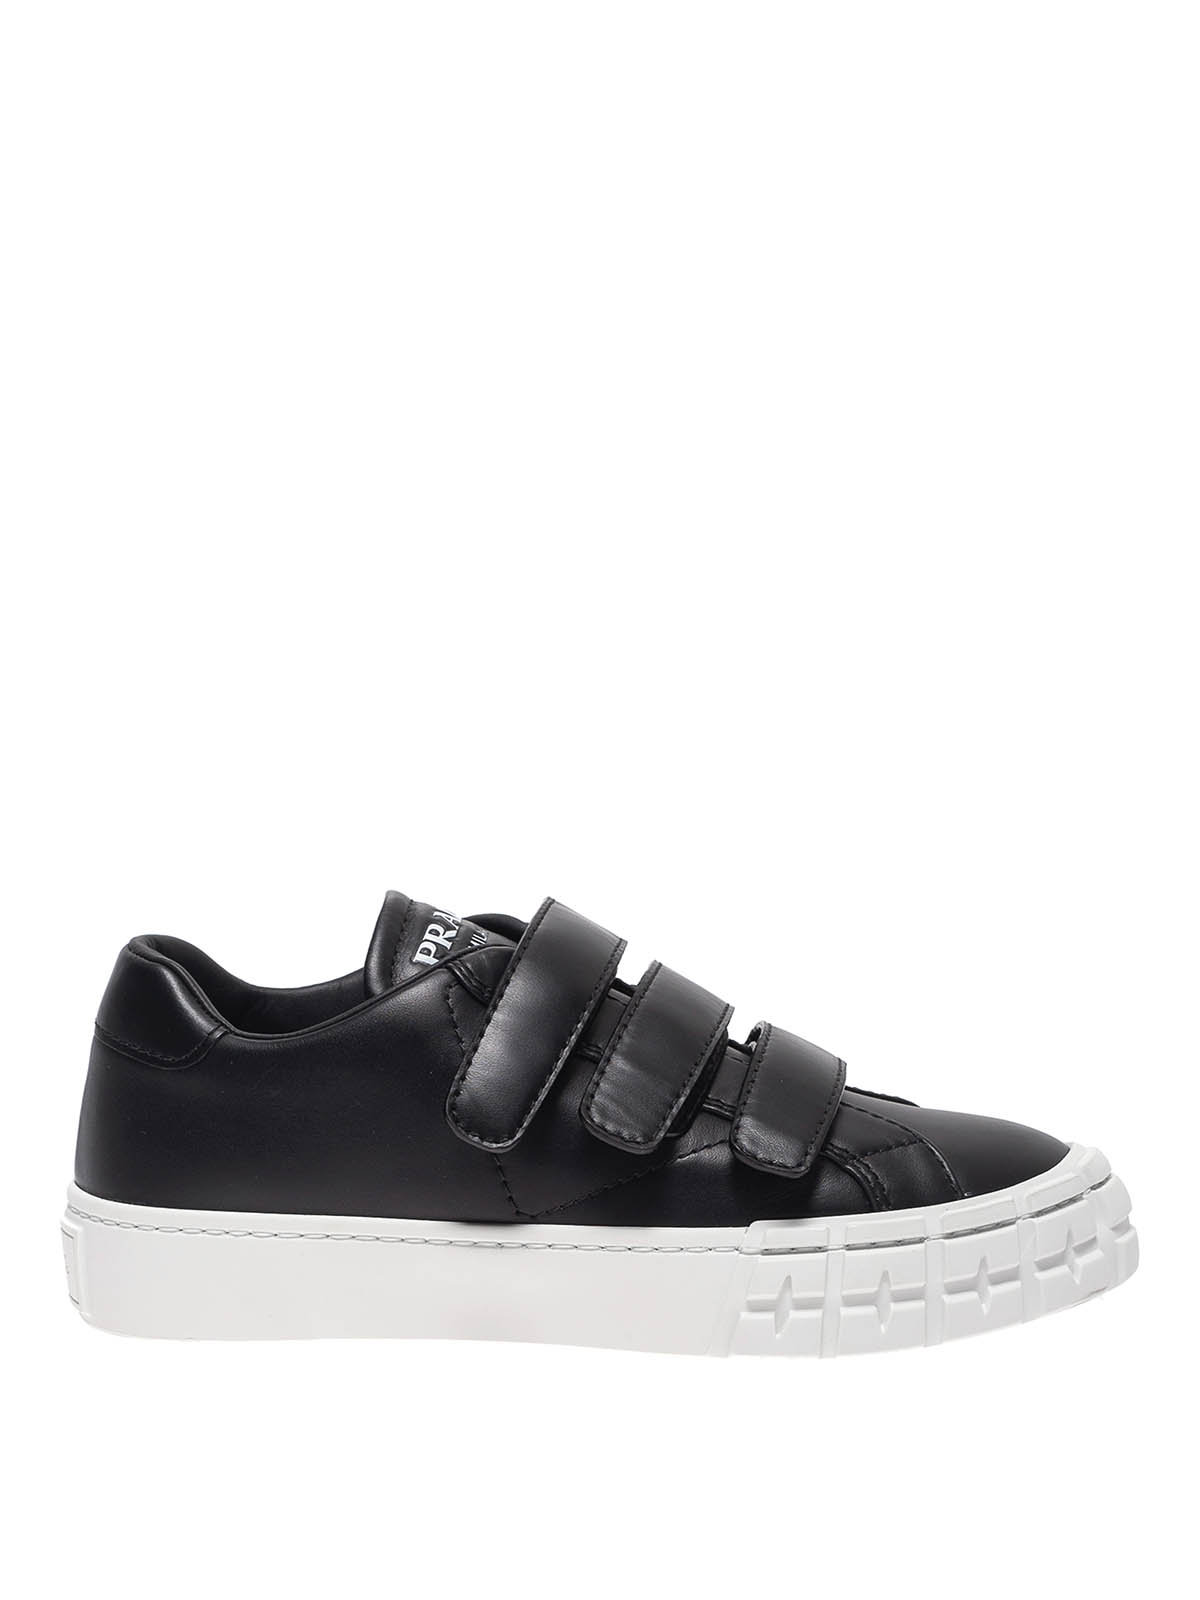 PRADA LEATHER SNEAKERS WITH VELCRO STRAPS